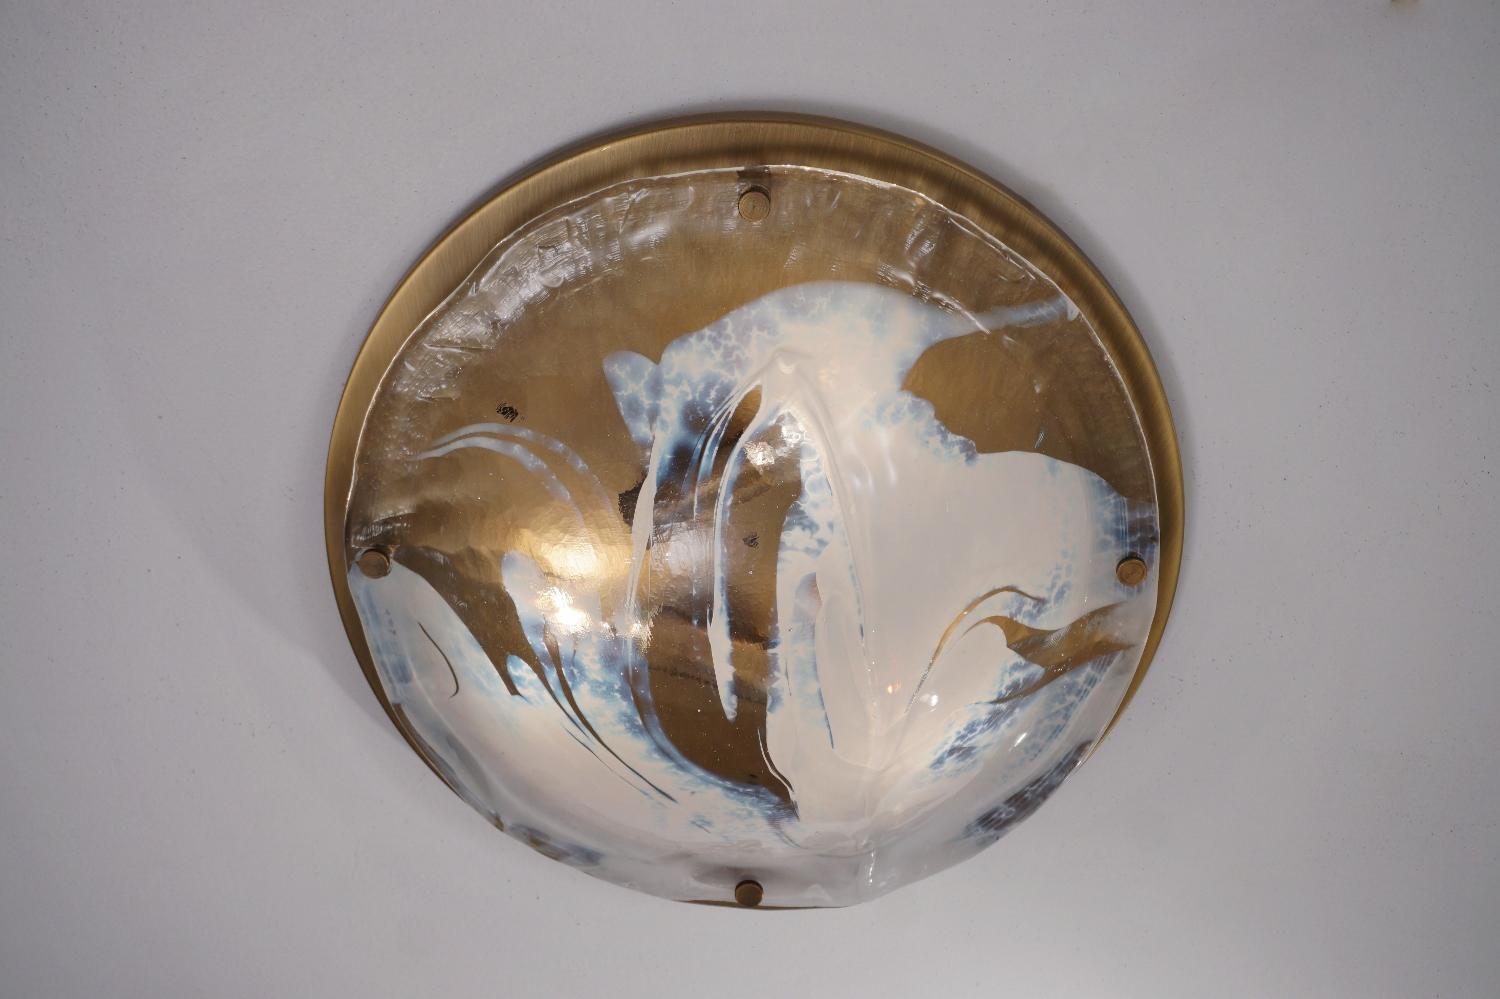 Murano art glass large flush light with a solid brass base by Hillebrand Lighting, circa 1970s German. The solid brass base is finished with an elegant satin effect.

Thoroughly cleaned respecting the vintage patina. Newly rewired, earthed, in